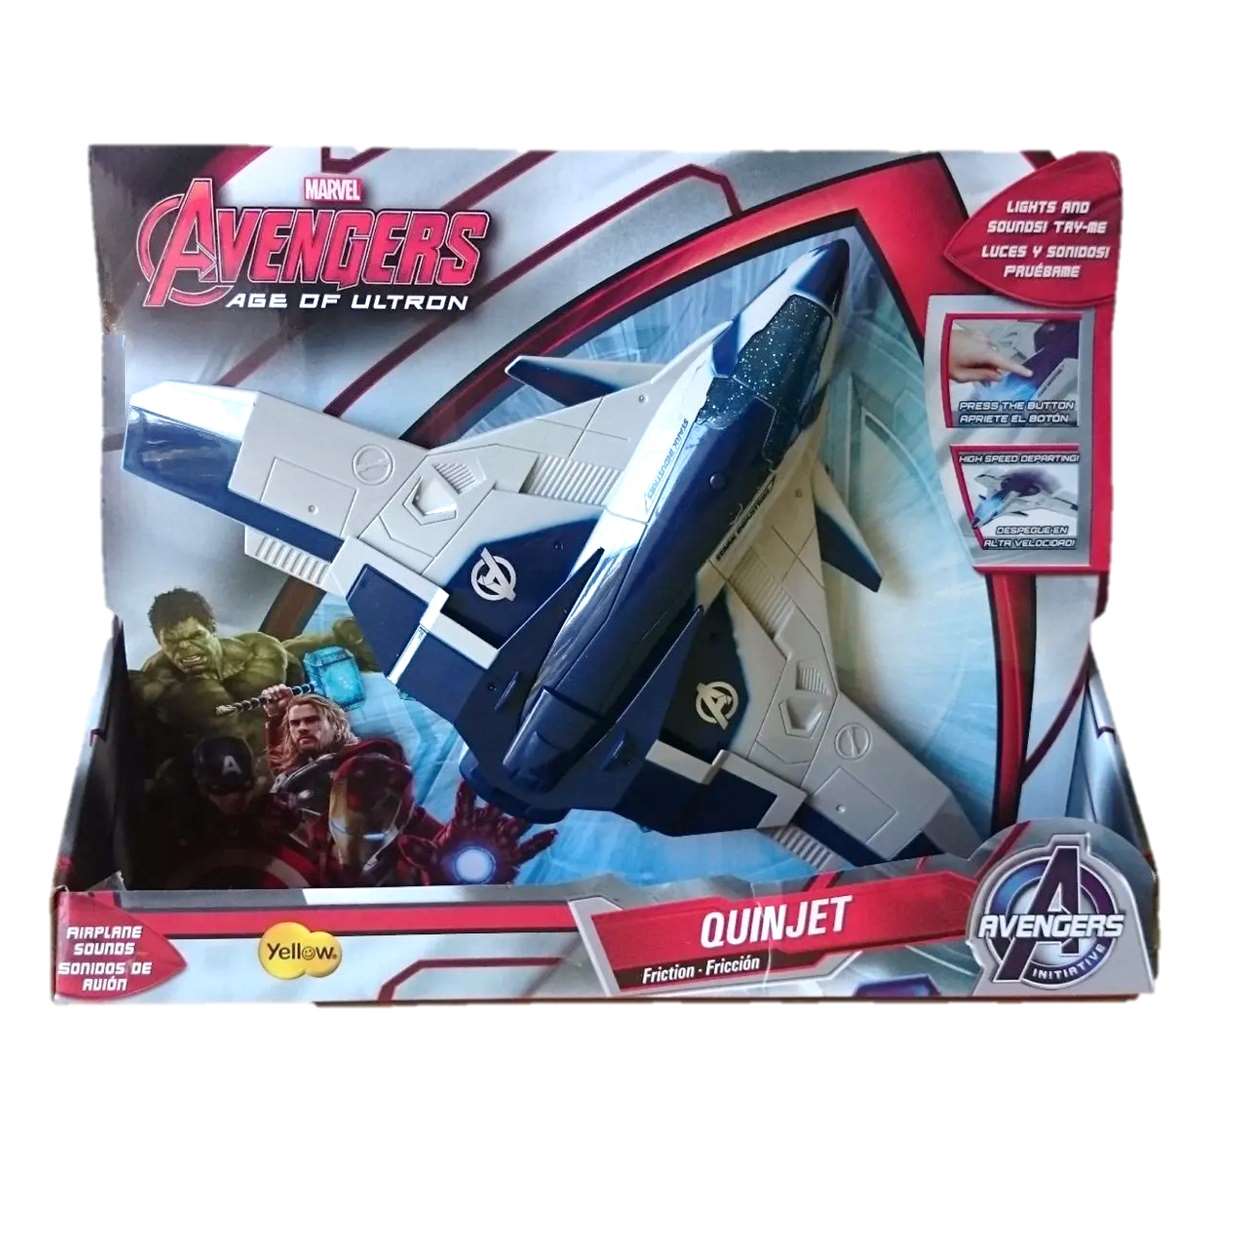 Quinjet Airplane Sounds Marvel Avengers Age Of Ultron 